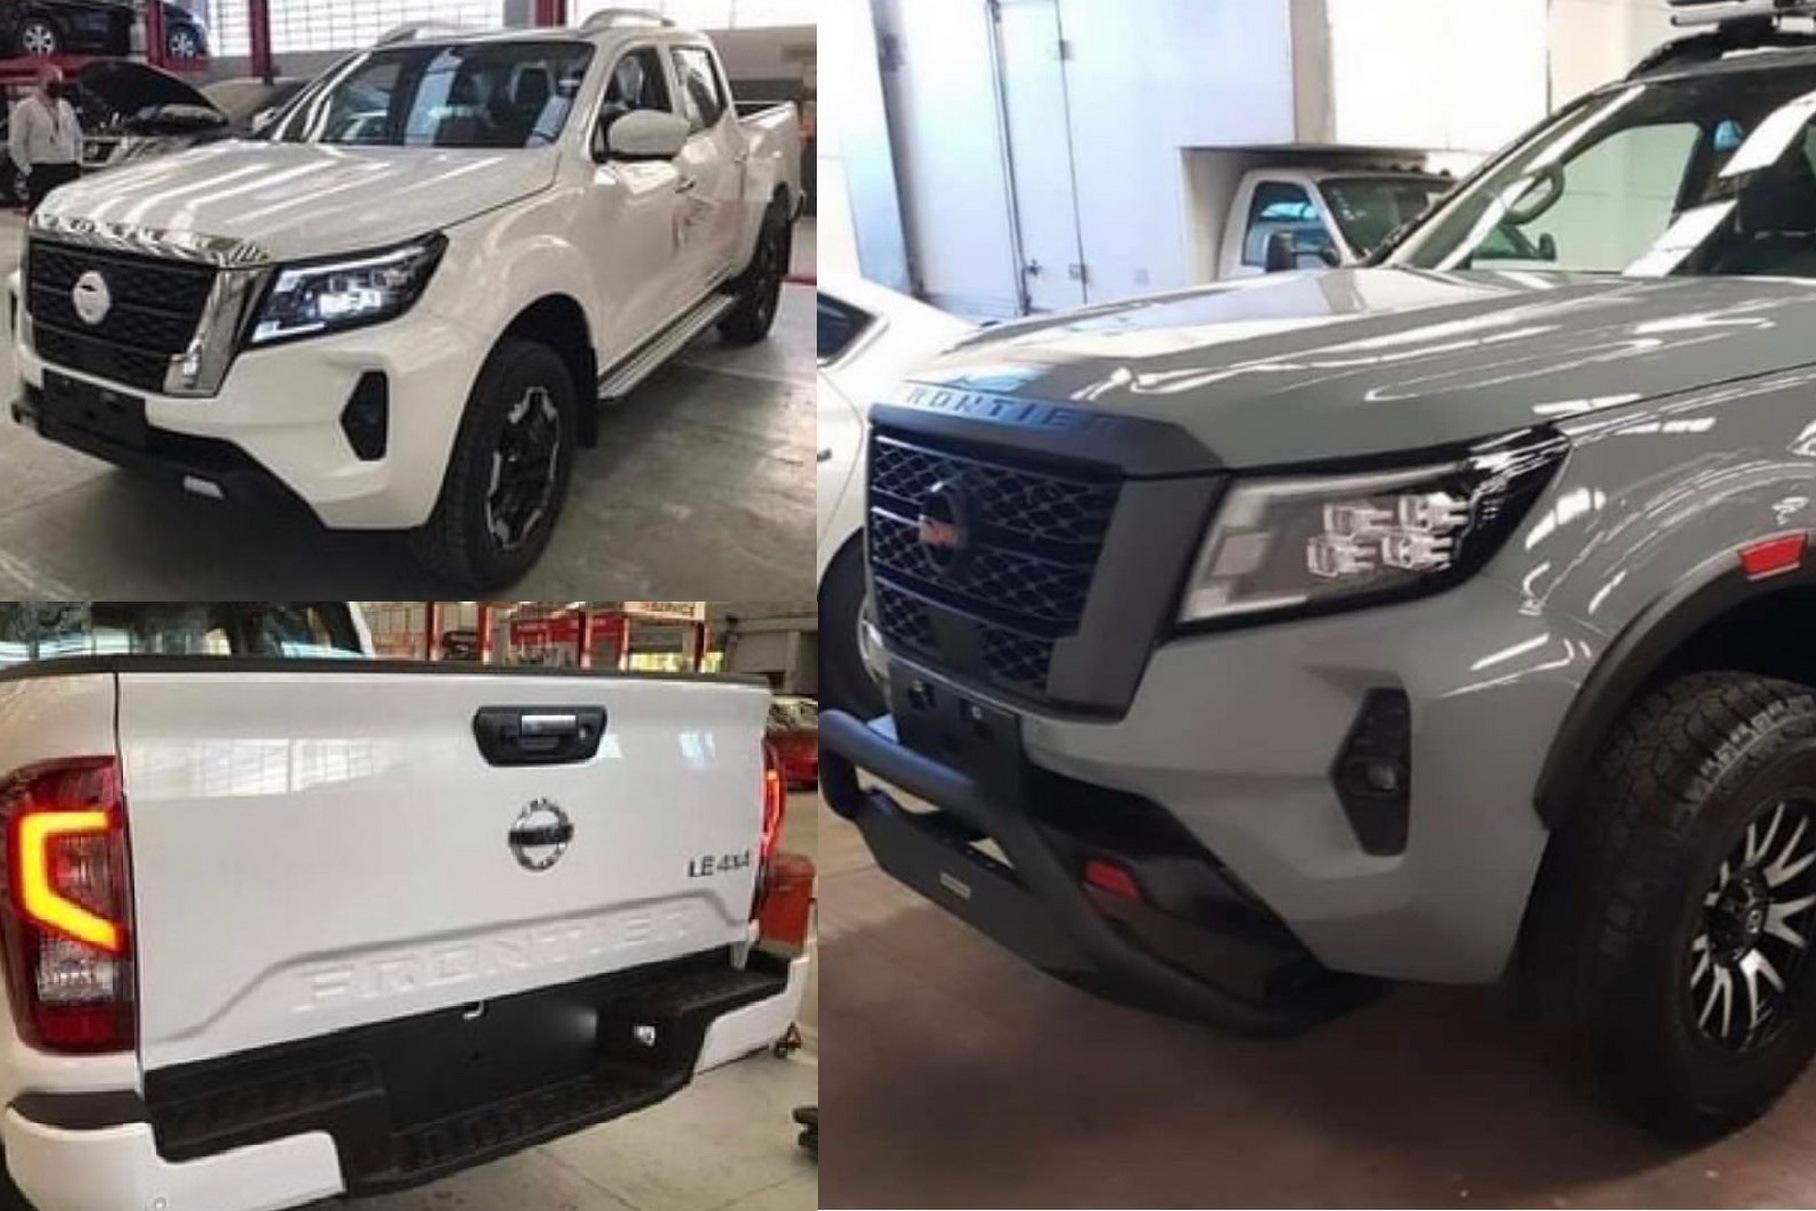 Photos Of 2021 Nissan Navara And Global Frontier For Markets Outside The  U.S. And Canada Leaked (Updated)